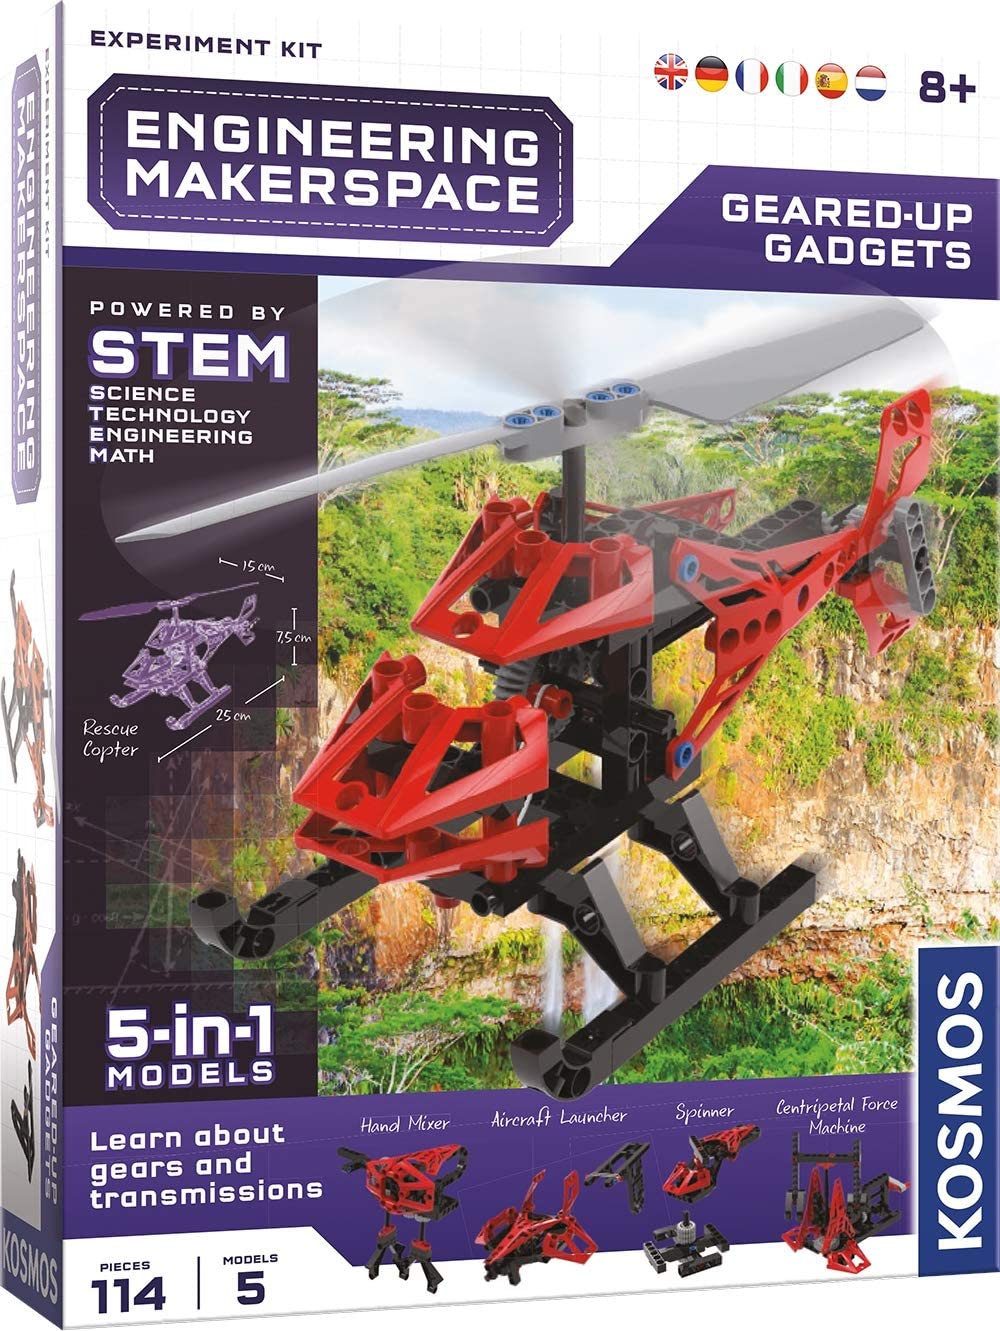 MAKERSPACE Geared Up Gadgets (665111)